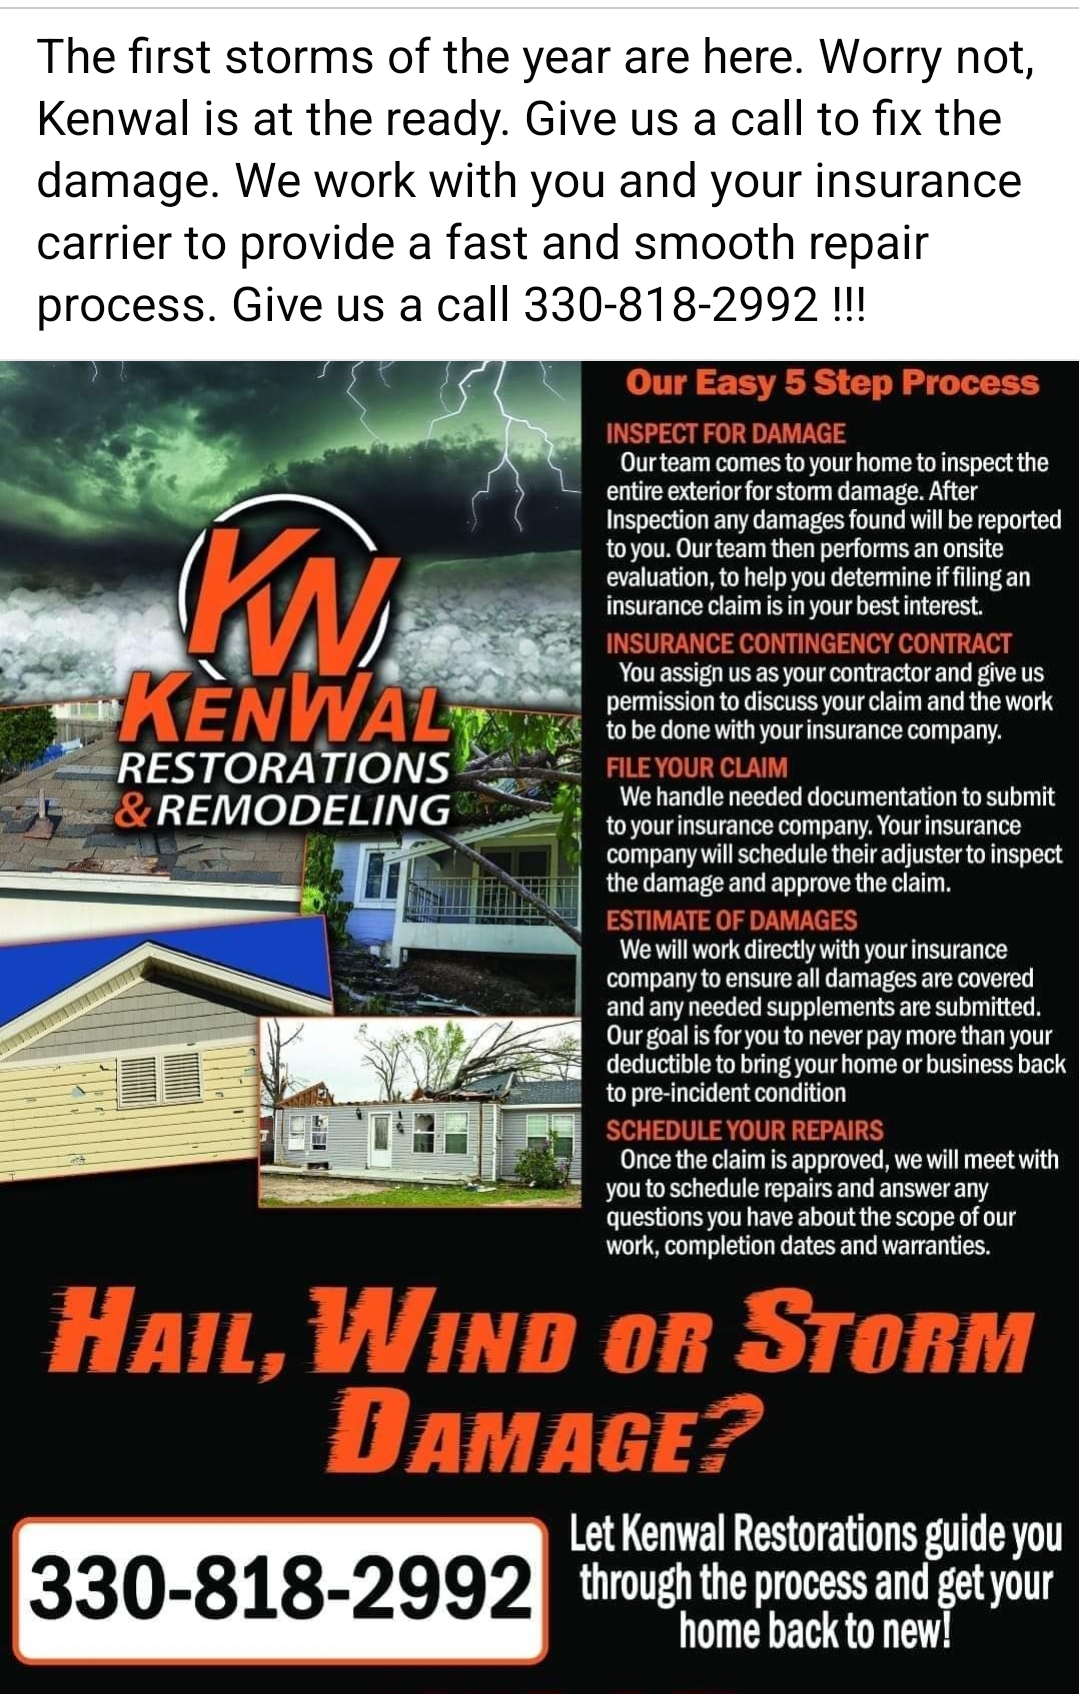 Kenwal Restorations & Remodeling LLC 5186 Unger Rd, Atwater Ohio 44201